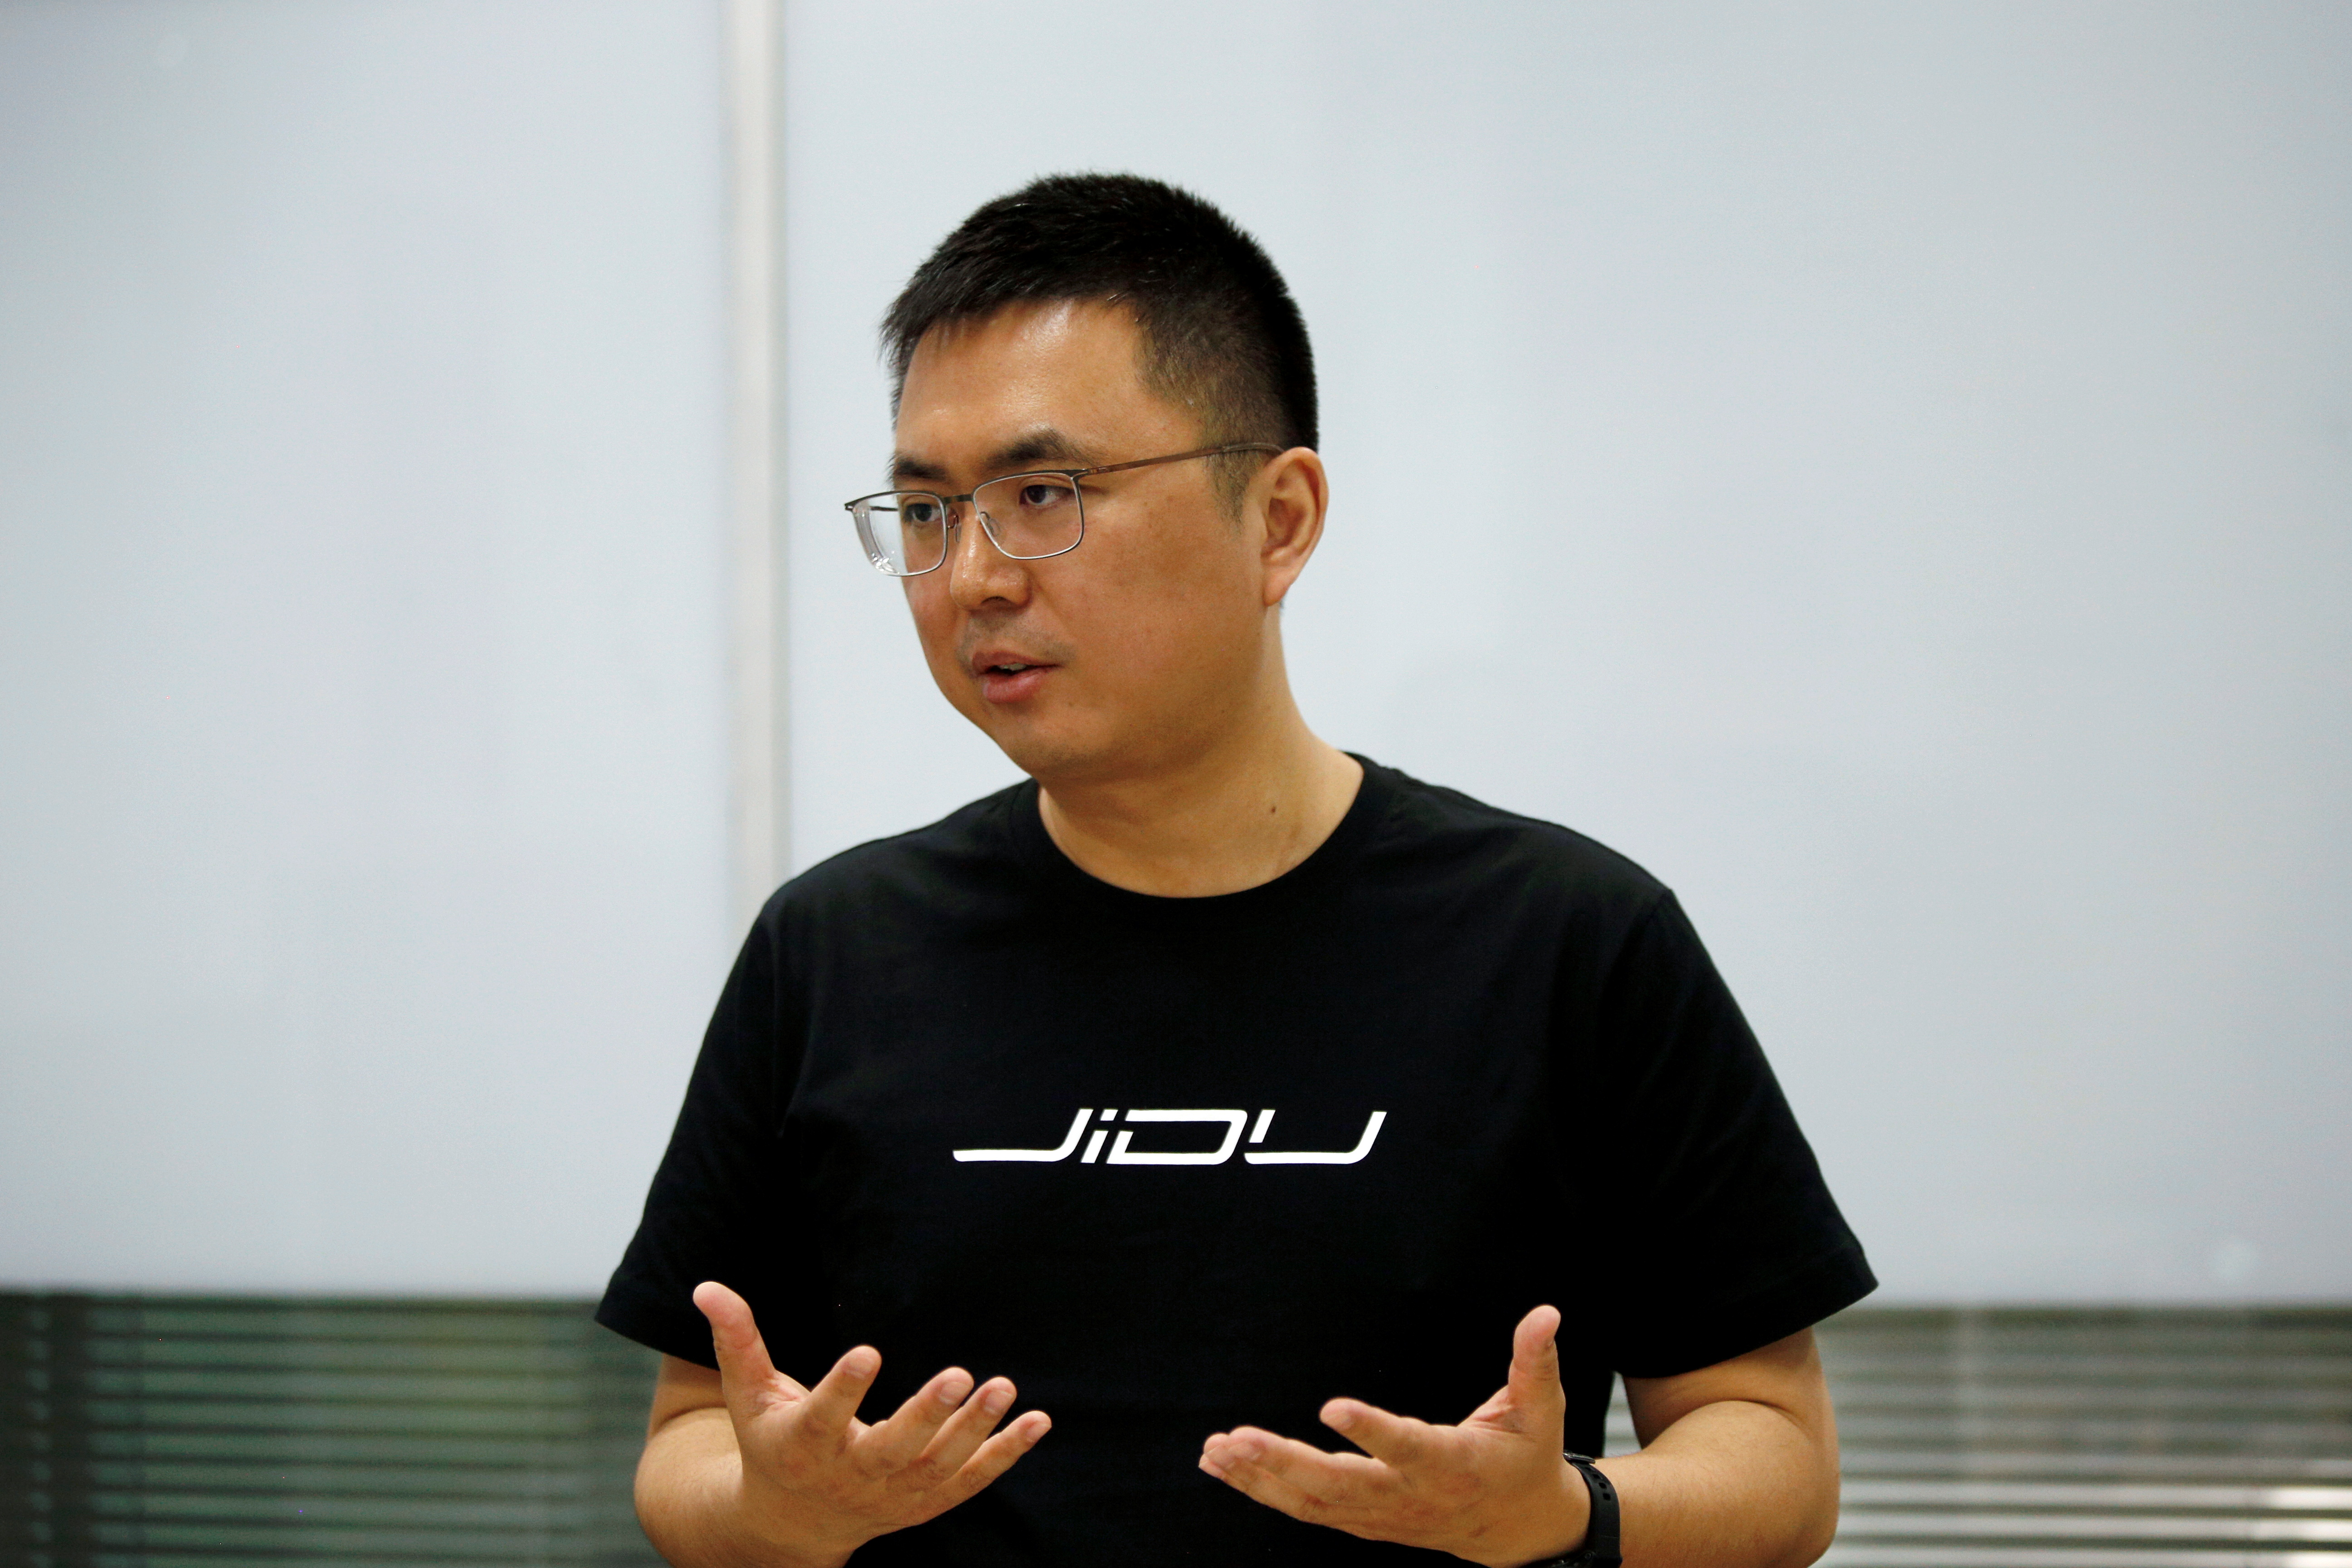 Jidu Auto CEO Xia Yiping attends an interview with Reuters in Beijing